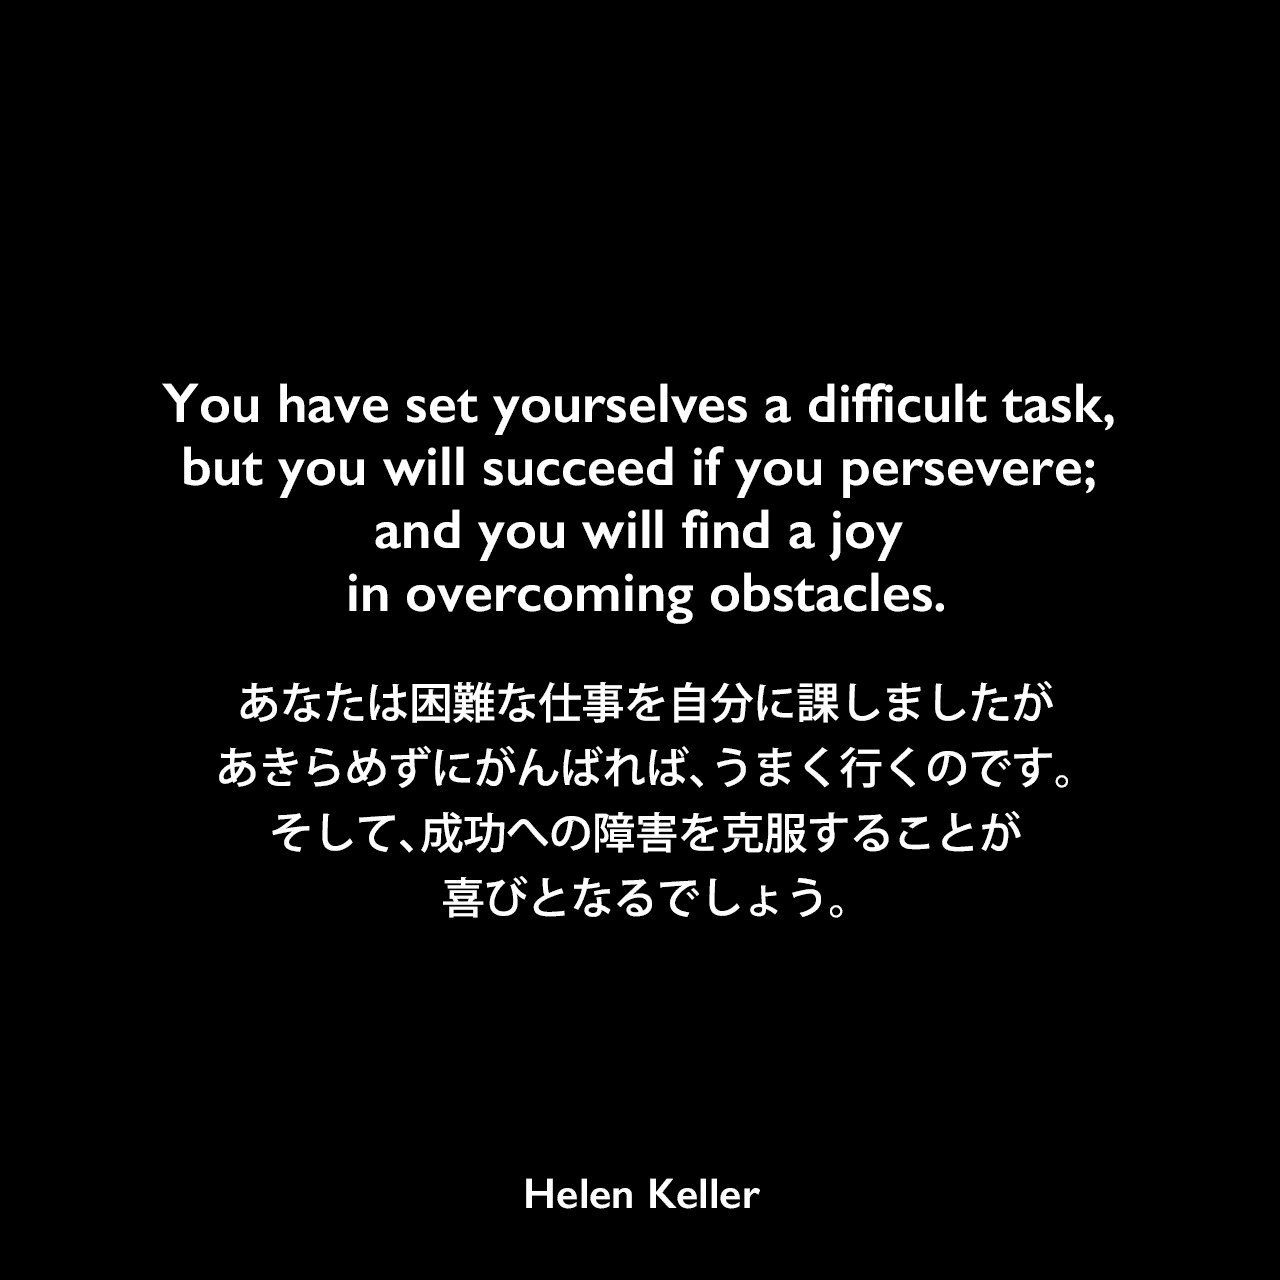 You have set yourselves a difficult task, but you will succeed if you persevere; and you will find a joy in overcoming obstacles.あなたは困難な仕事を自分に課しましたが、あきらめずにがんばれば、うまく行くのです。そして、成功への障害を克服することが喜びとなるでしょう。- 聴覚障害者へのスピーチの指導を促進するための言葉1896年Helen Keller